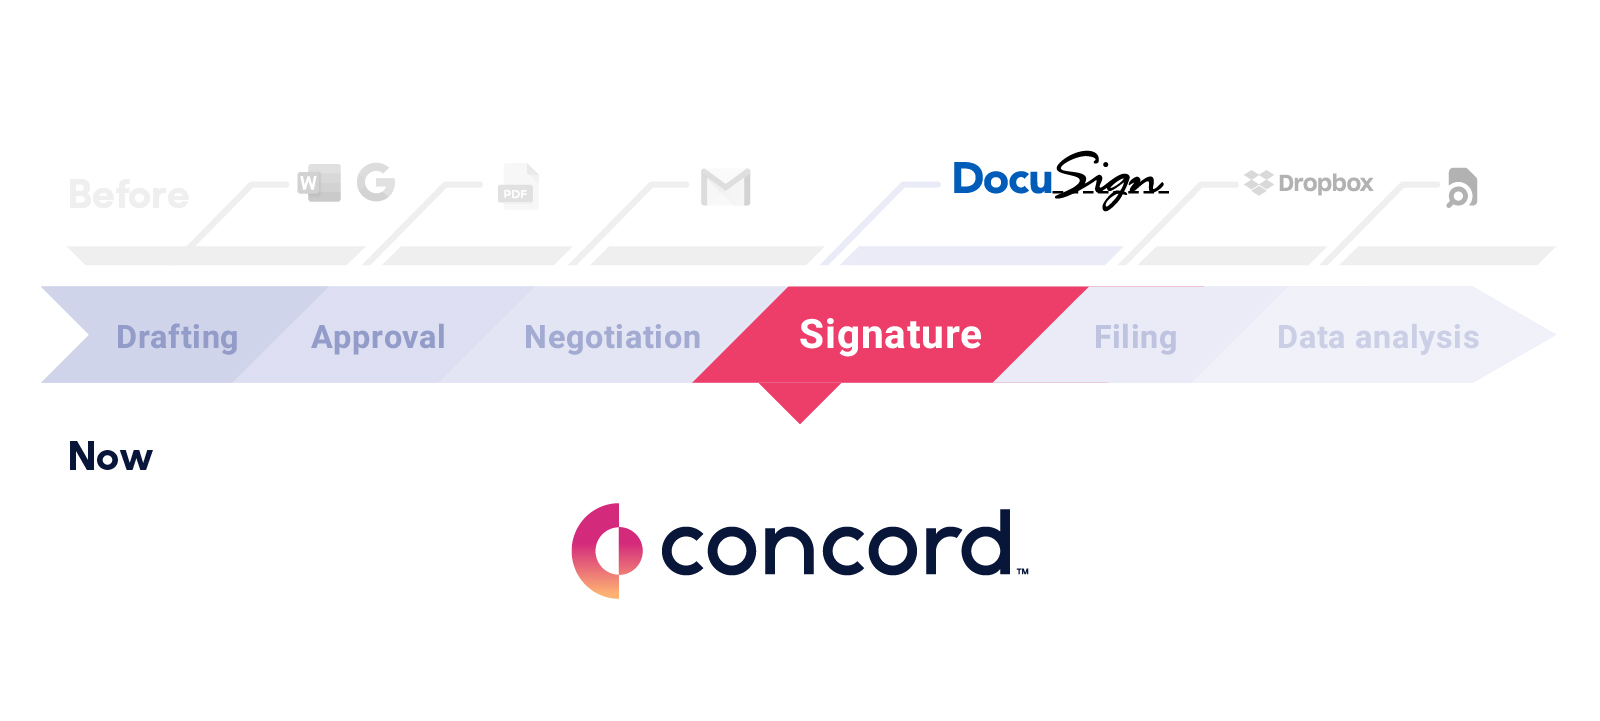 Electronic signatures are the final stage in finalizing the contract, but not the last stage of the lifecycle.